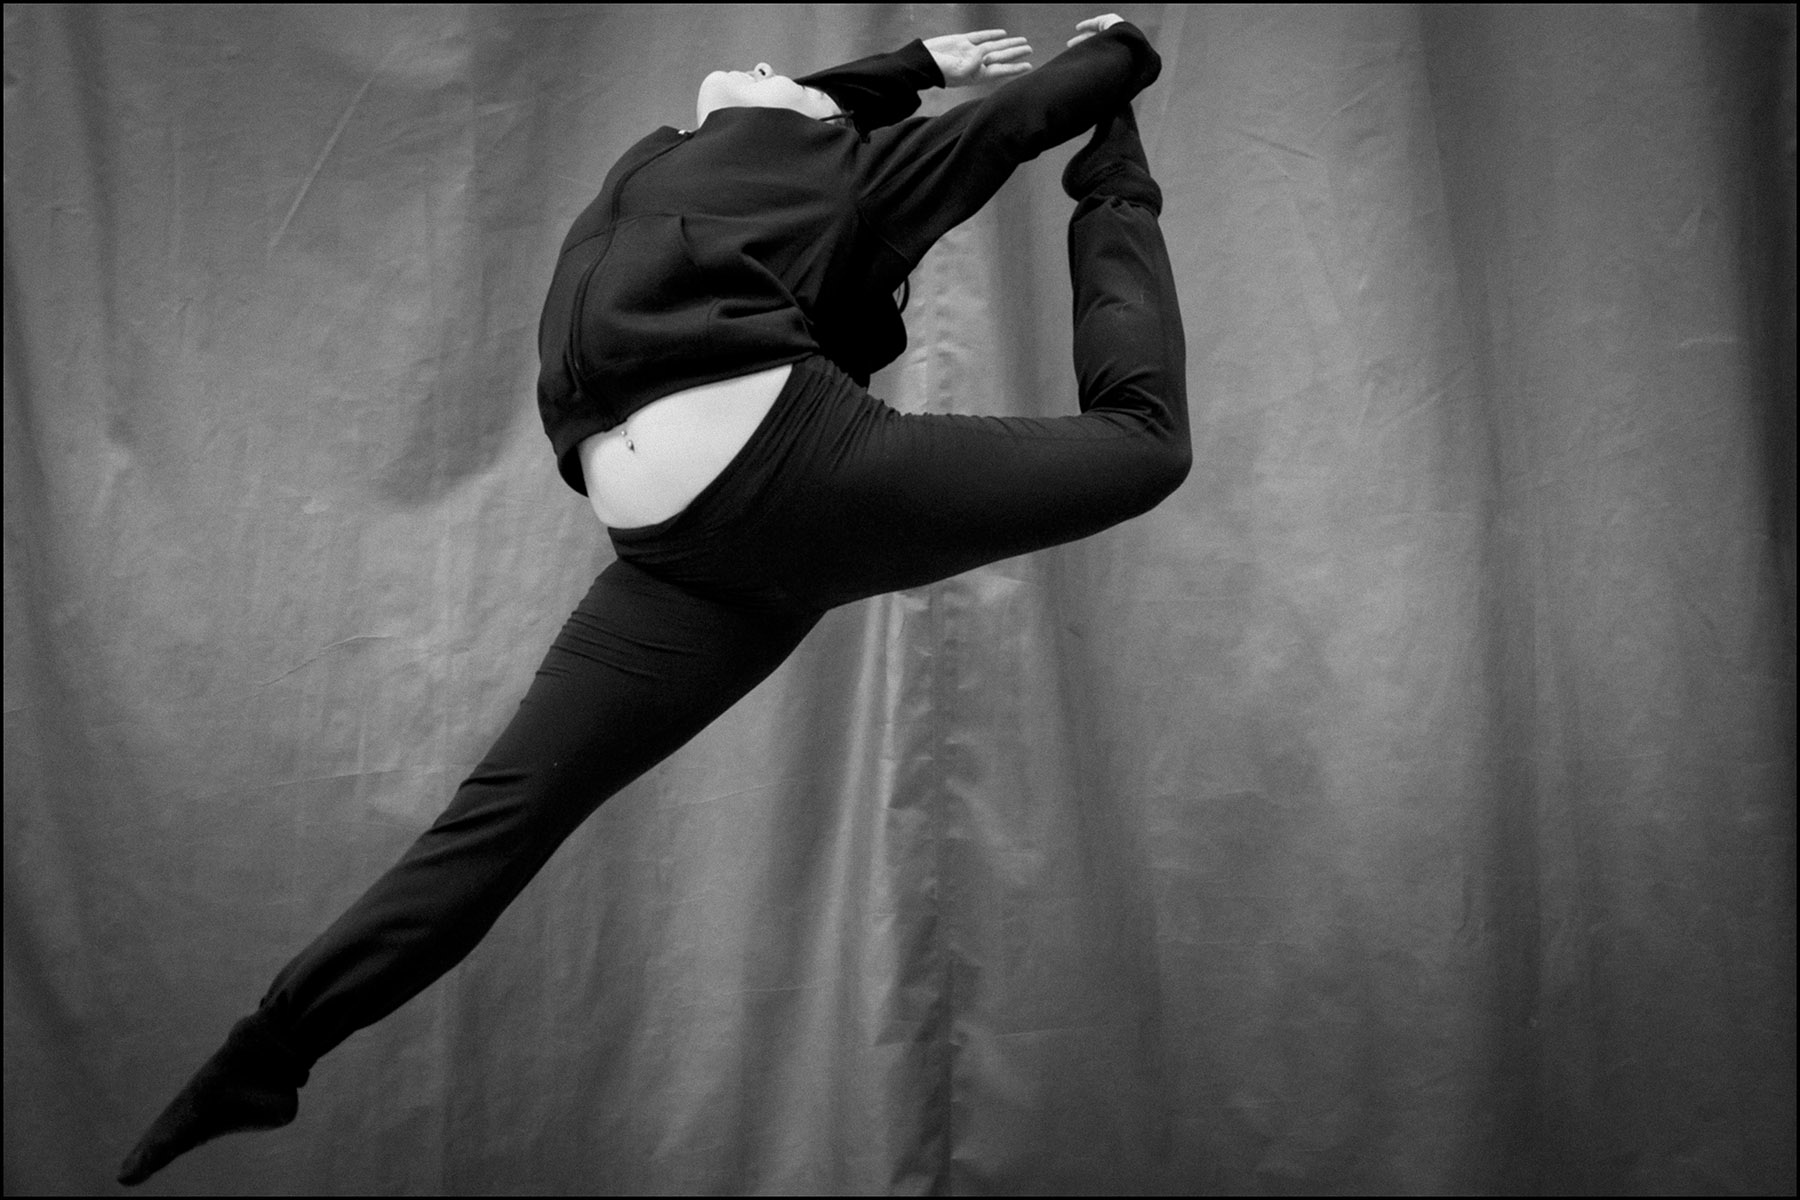 A student leaps in the air during rehearsal